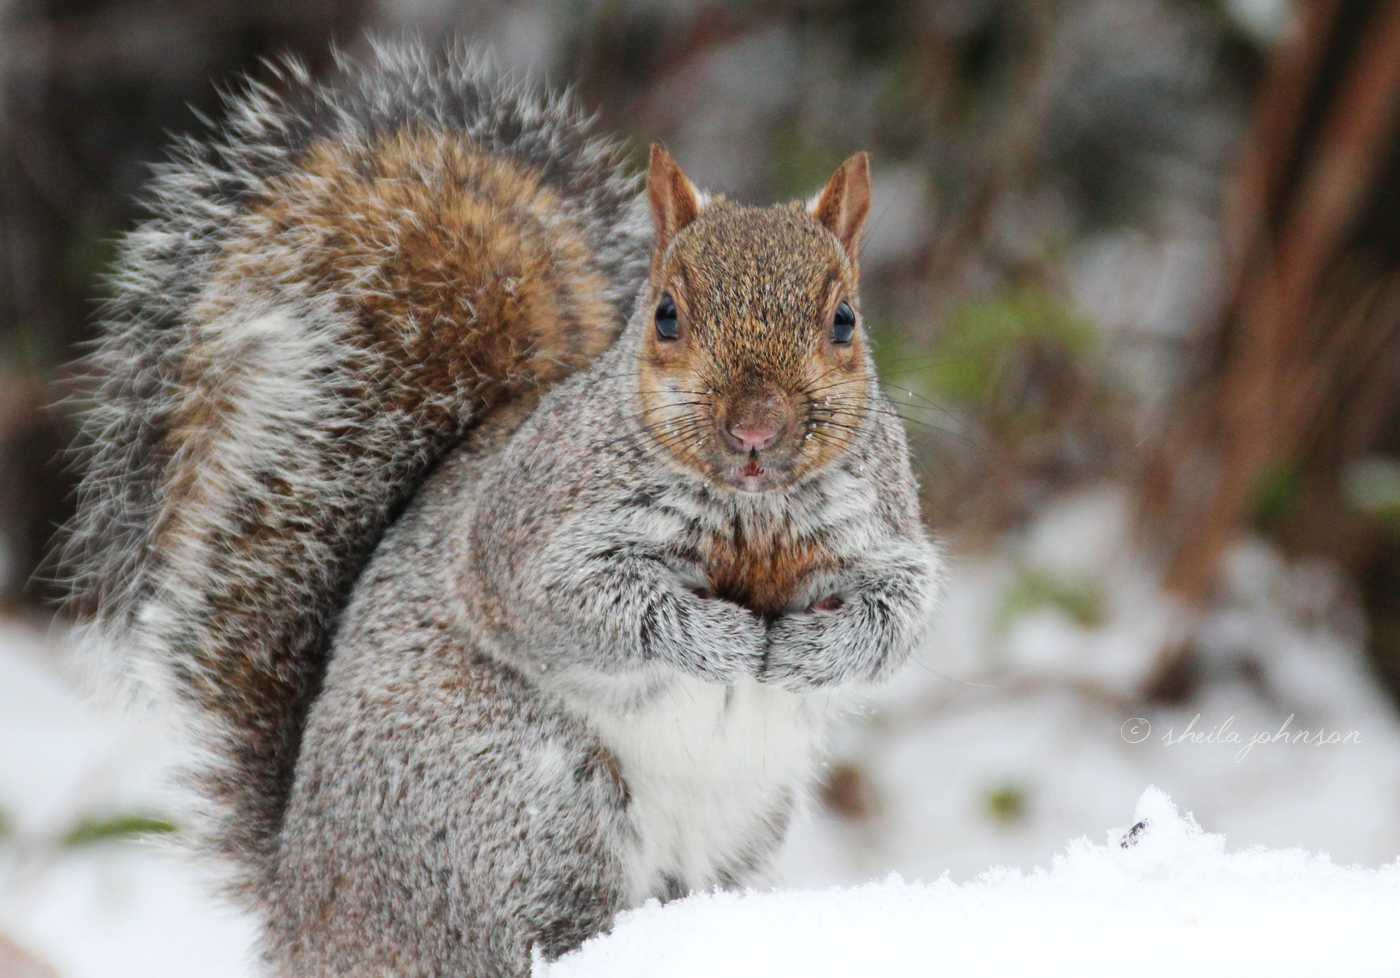 Pretty As A Picture, This Squirrel Certainly Believes Nuts Will Be The Reward Of Posing In The Snow. Sorry, Snow Bunny, I've Got No Nuts.